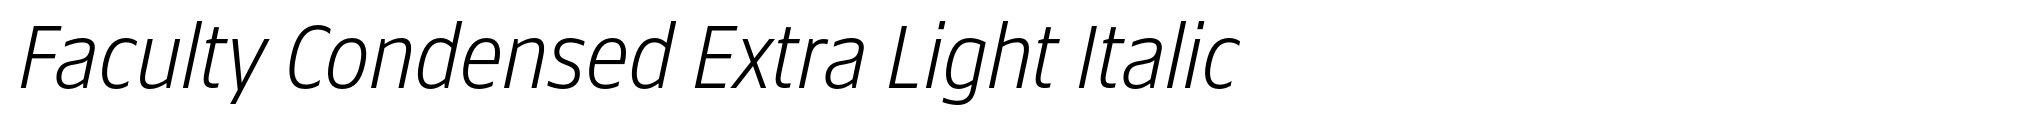 Faculty Condensed Extra Light Italic image